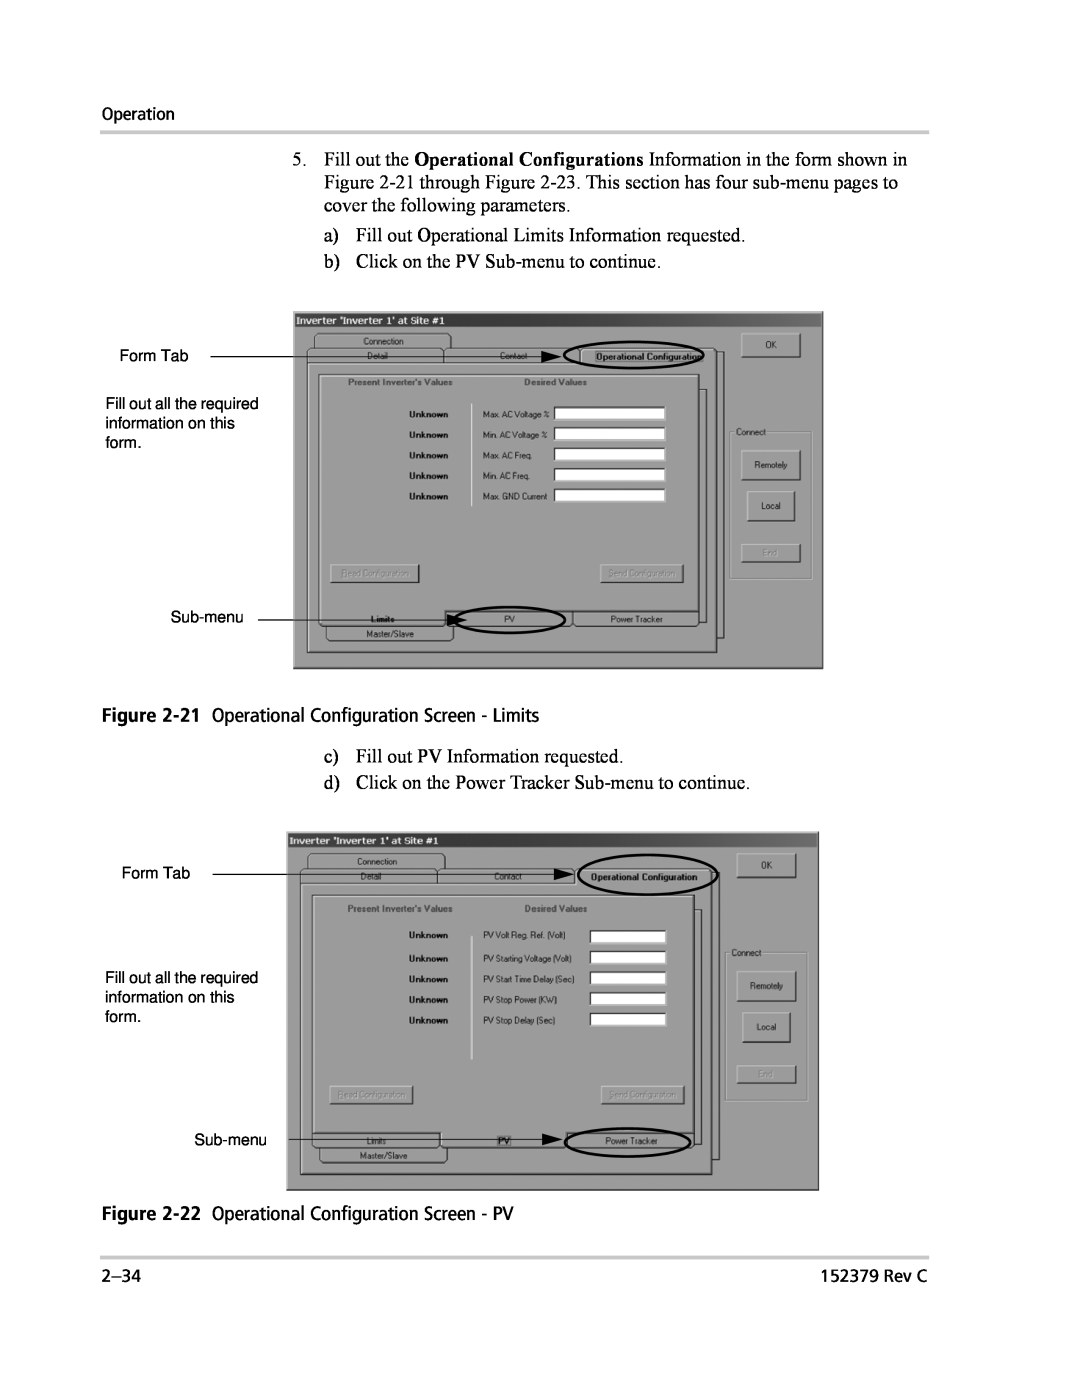 Xantrex Technology PV100S-208 manual a Fill out Operational Limits Information requested 